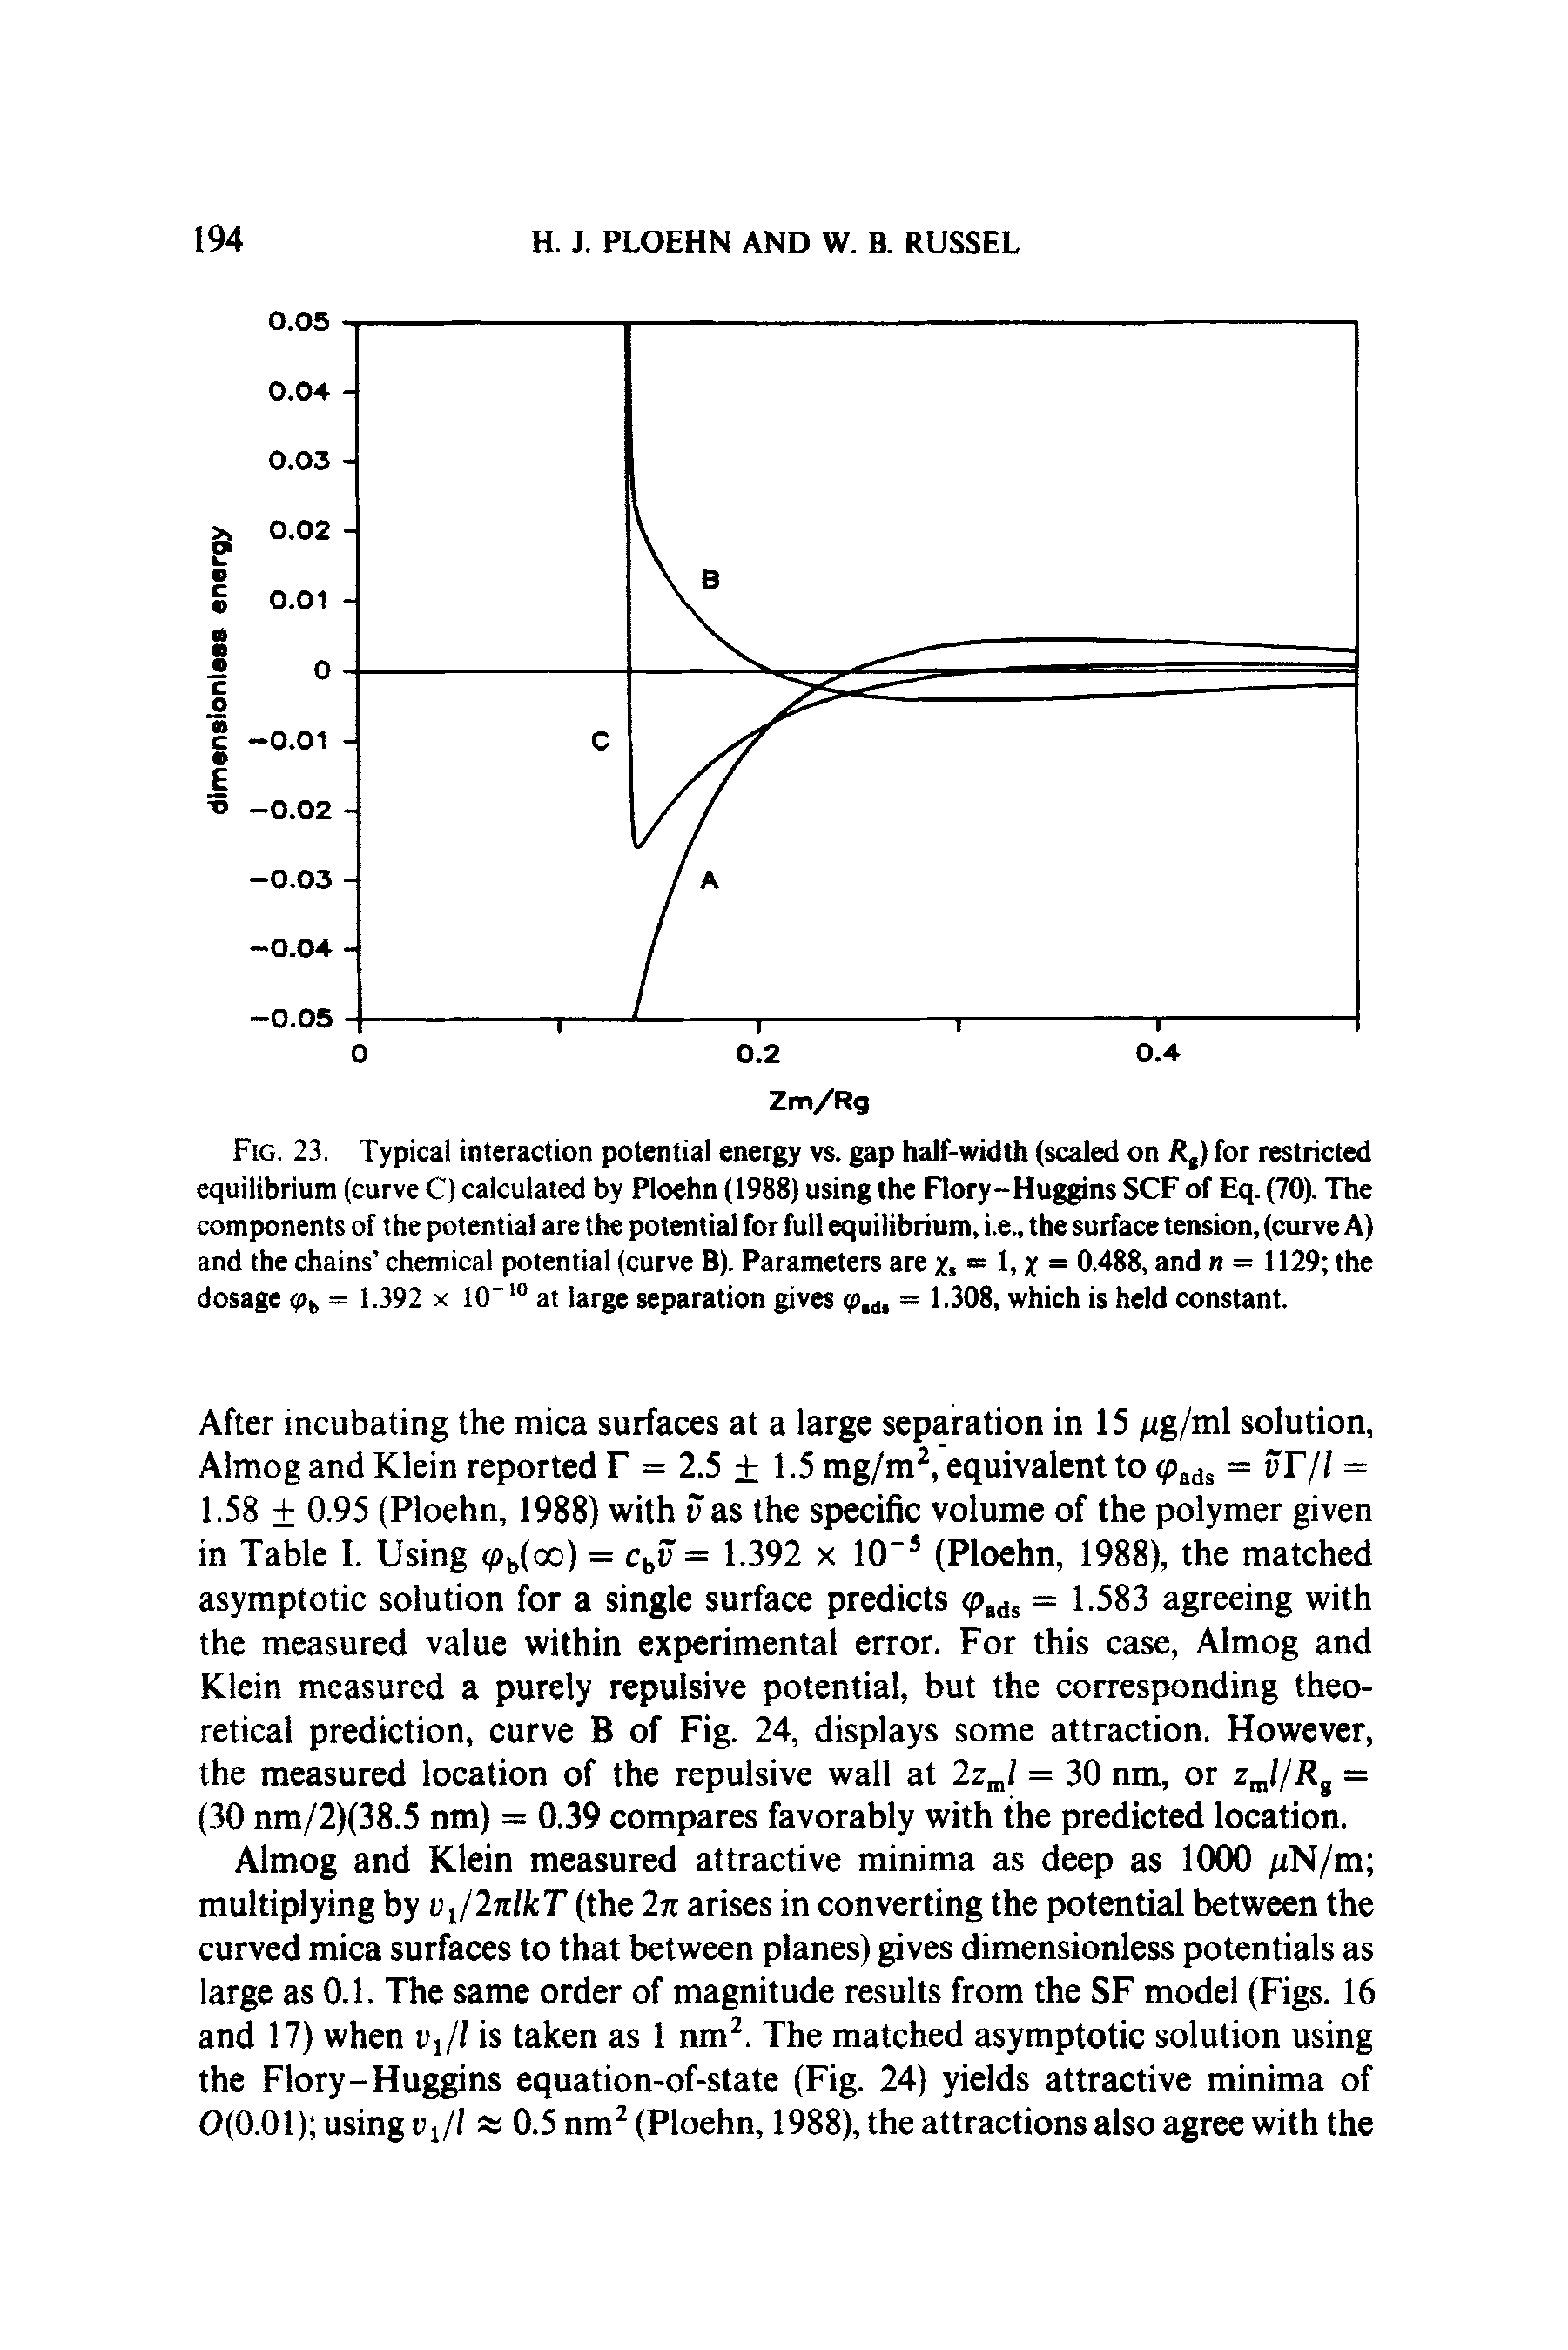 Fig. 23. Typical interaction potential energy vs. gap half-width (scaled on Rt) for restricted equilibrium (curve C) calculated by Ploehn (1988) using the Flory-Huggins SCF of Eq. (70). The components of the potential are the potential for full equilibrium, i.e., the surface tension, (curve A) and the chains chemical potential (curve B). Parameters are x = 1, x = 0.488, and n= 1129 the dosage <ph - 1.392 x 10 10 at large separation gives ip,d, = 1.308, which is held constant.